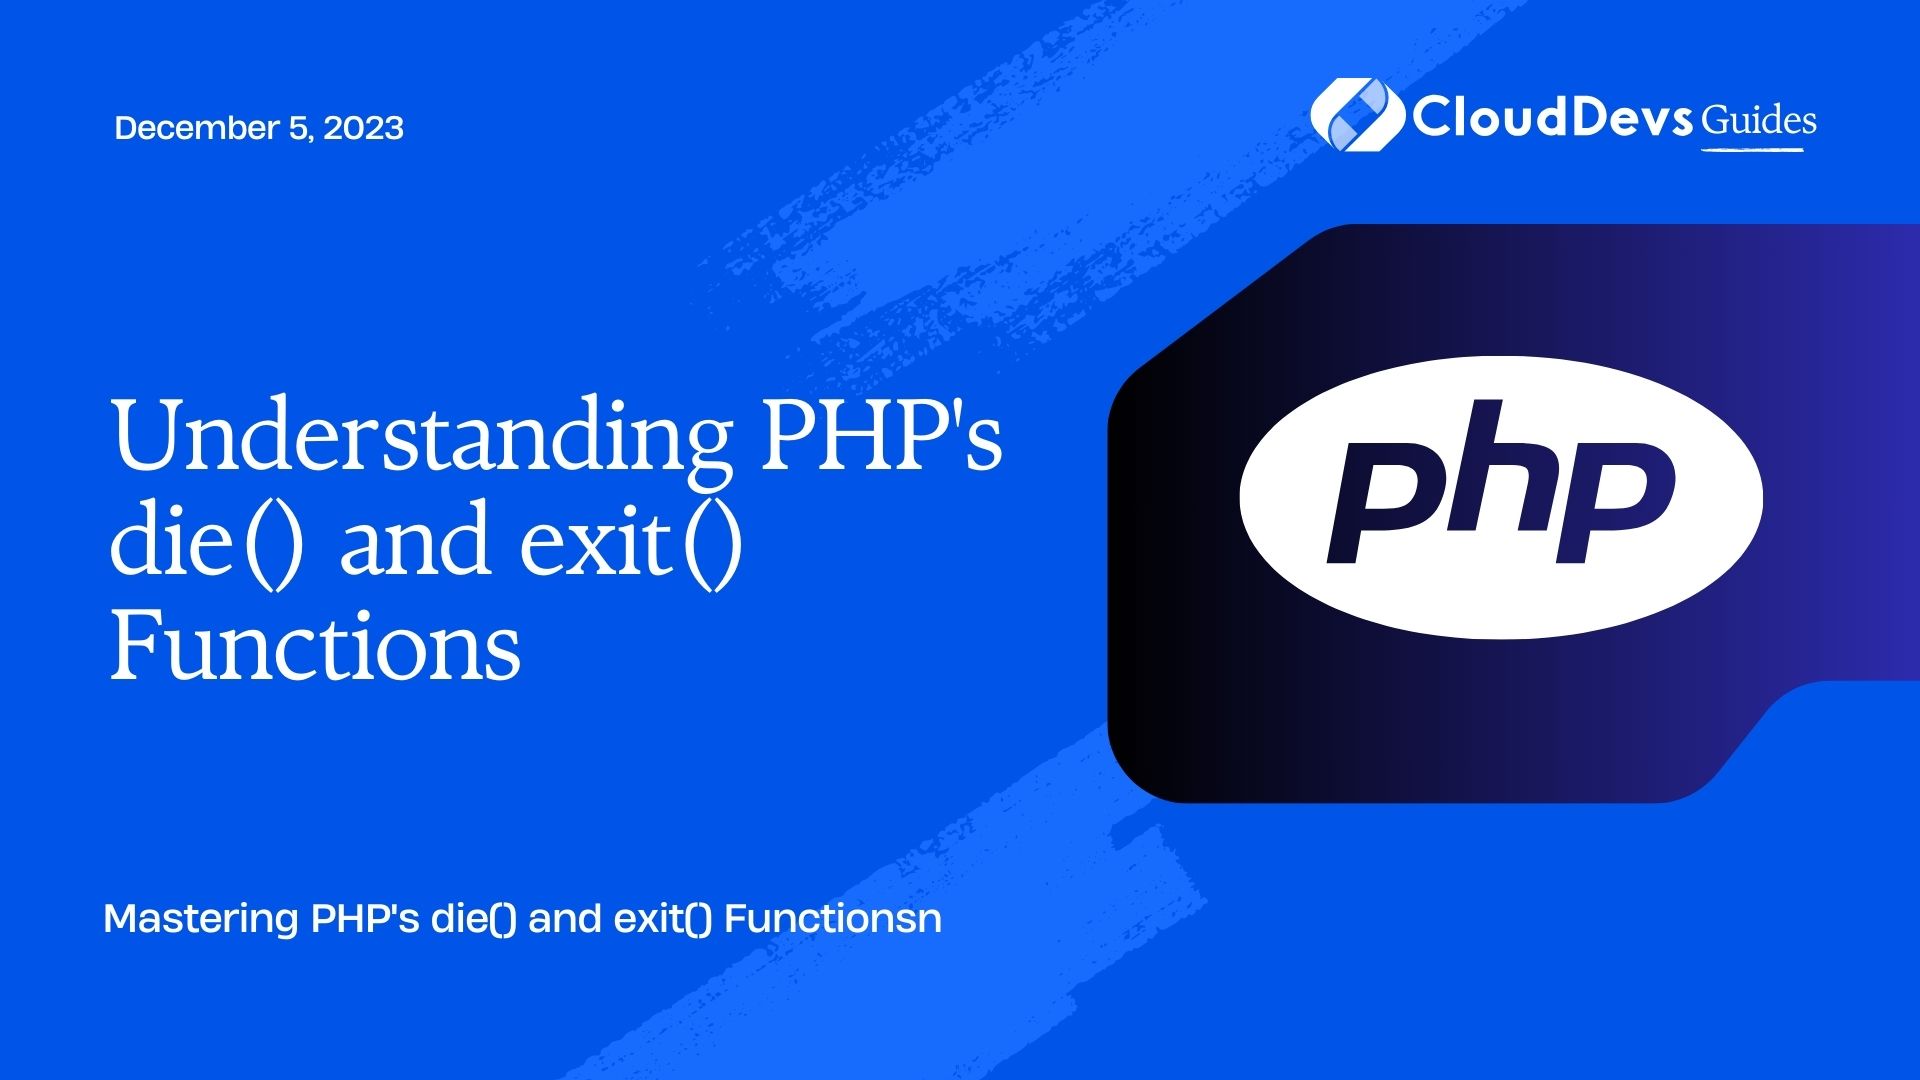 Understanding PHP's die() and exit() Functions